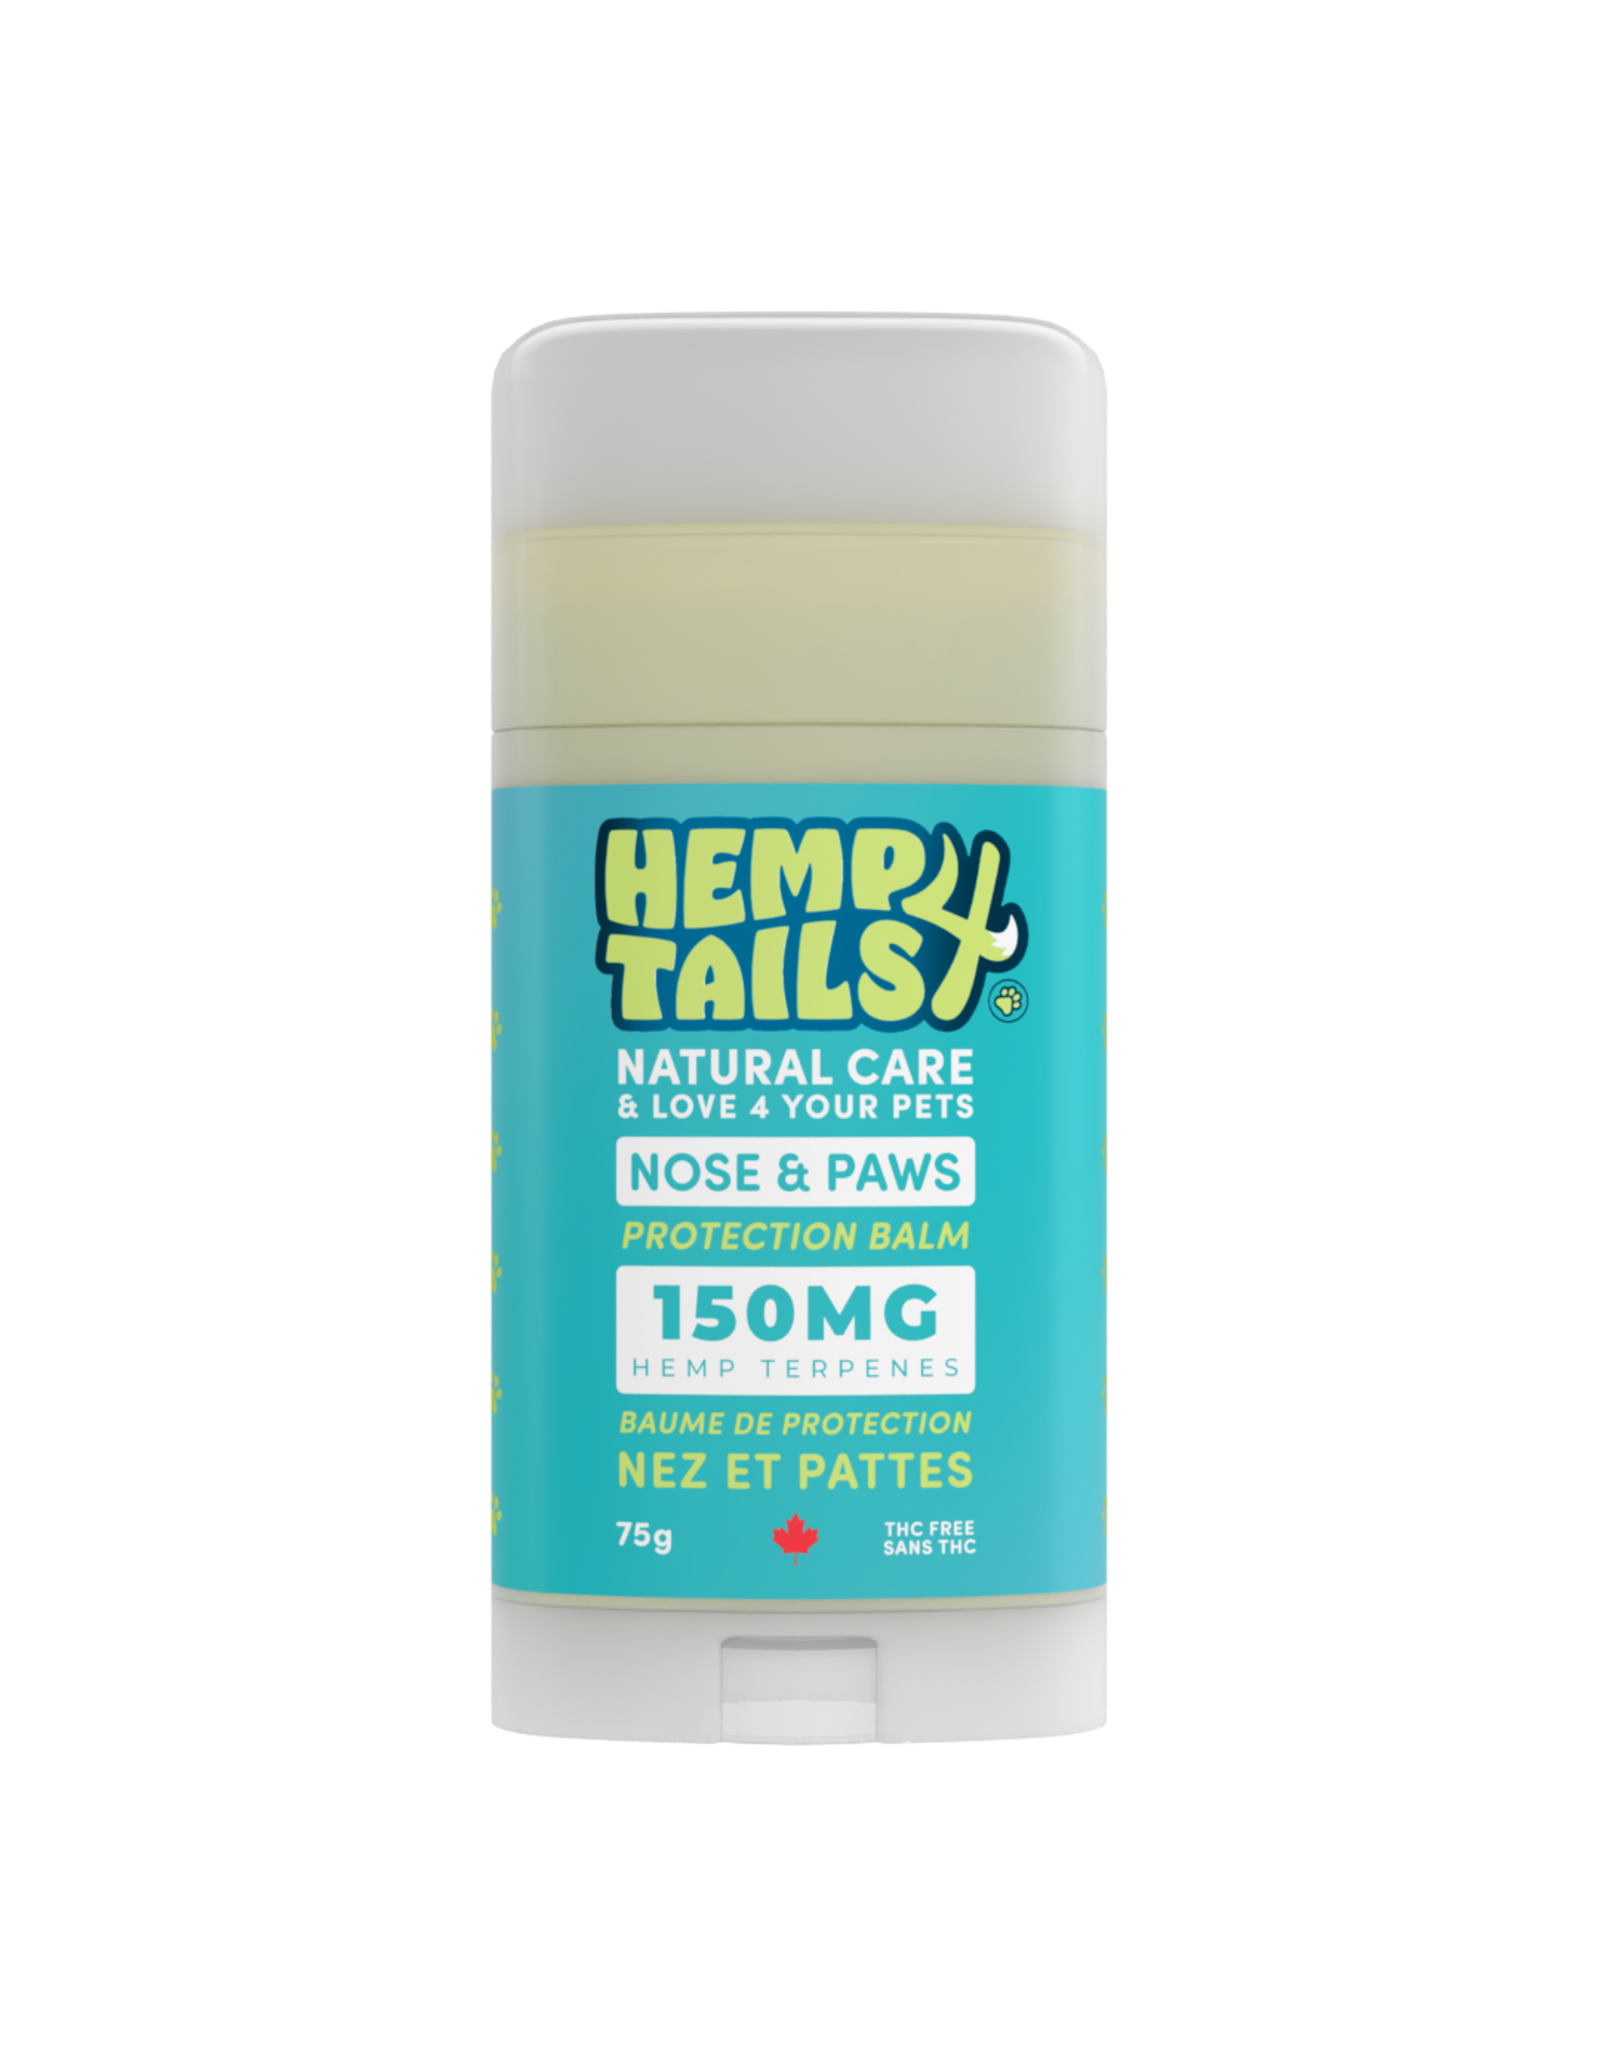 Hemp4Tails Nose & Paws Protection Balm